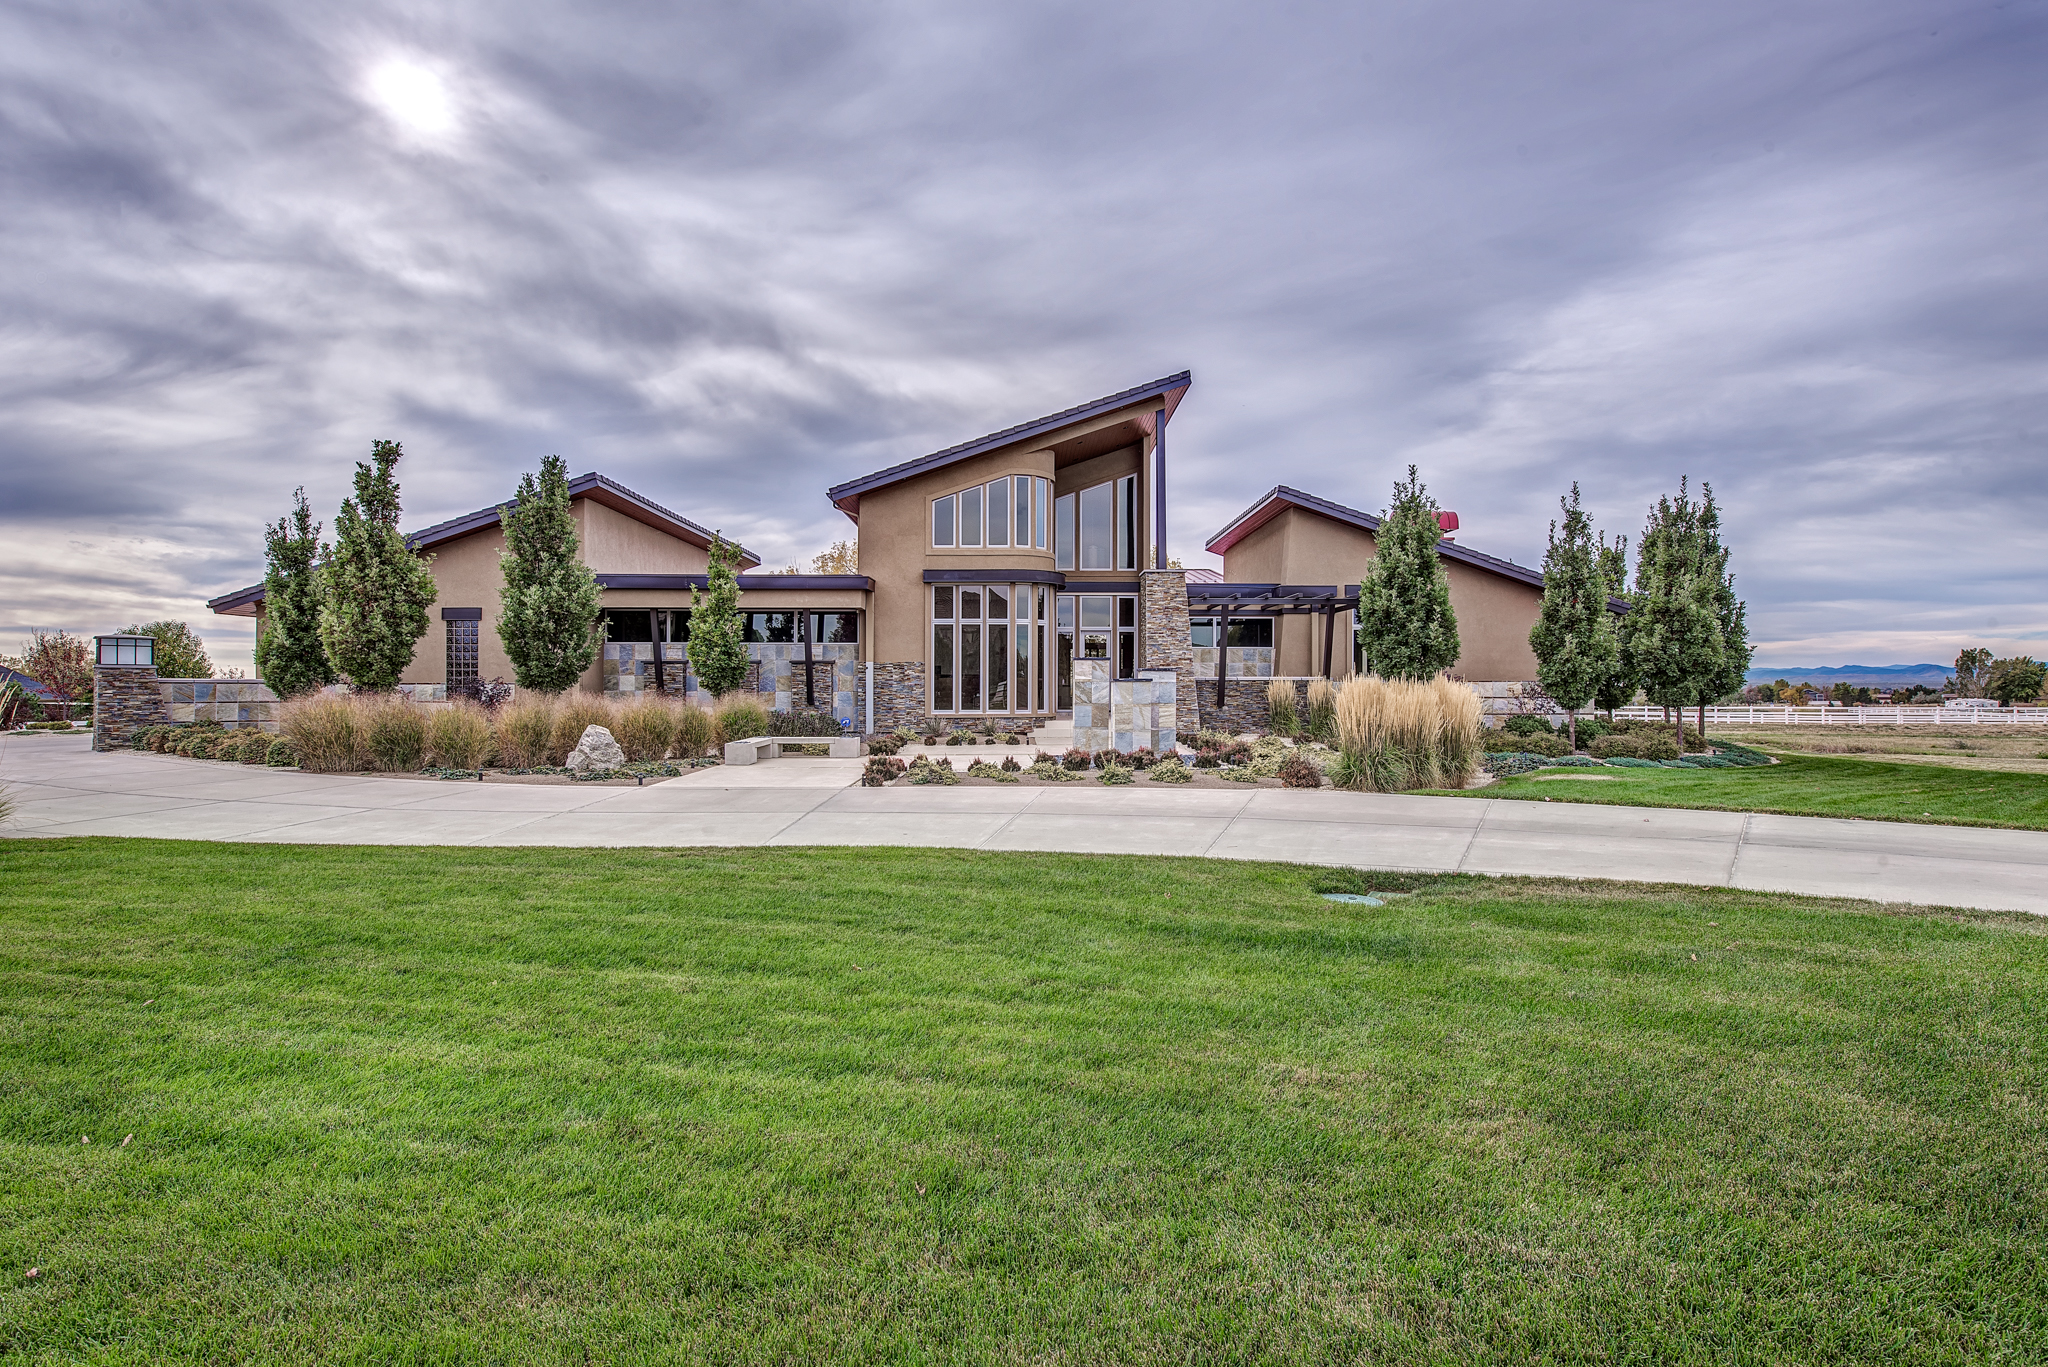 15000 Prairie Place, Broomfield. Sold for $2,100,000 by LIV Sotheby’s International Realty’s MileHiModern team.